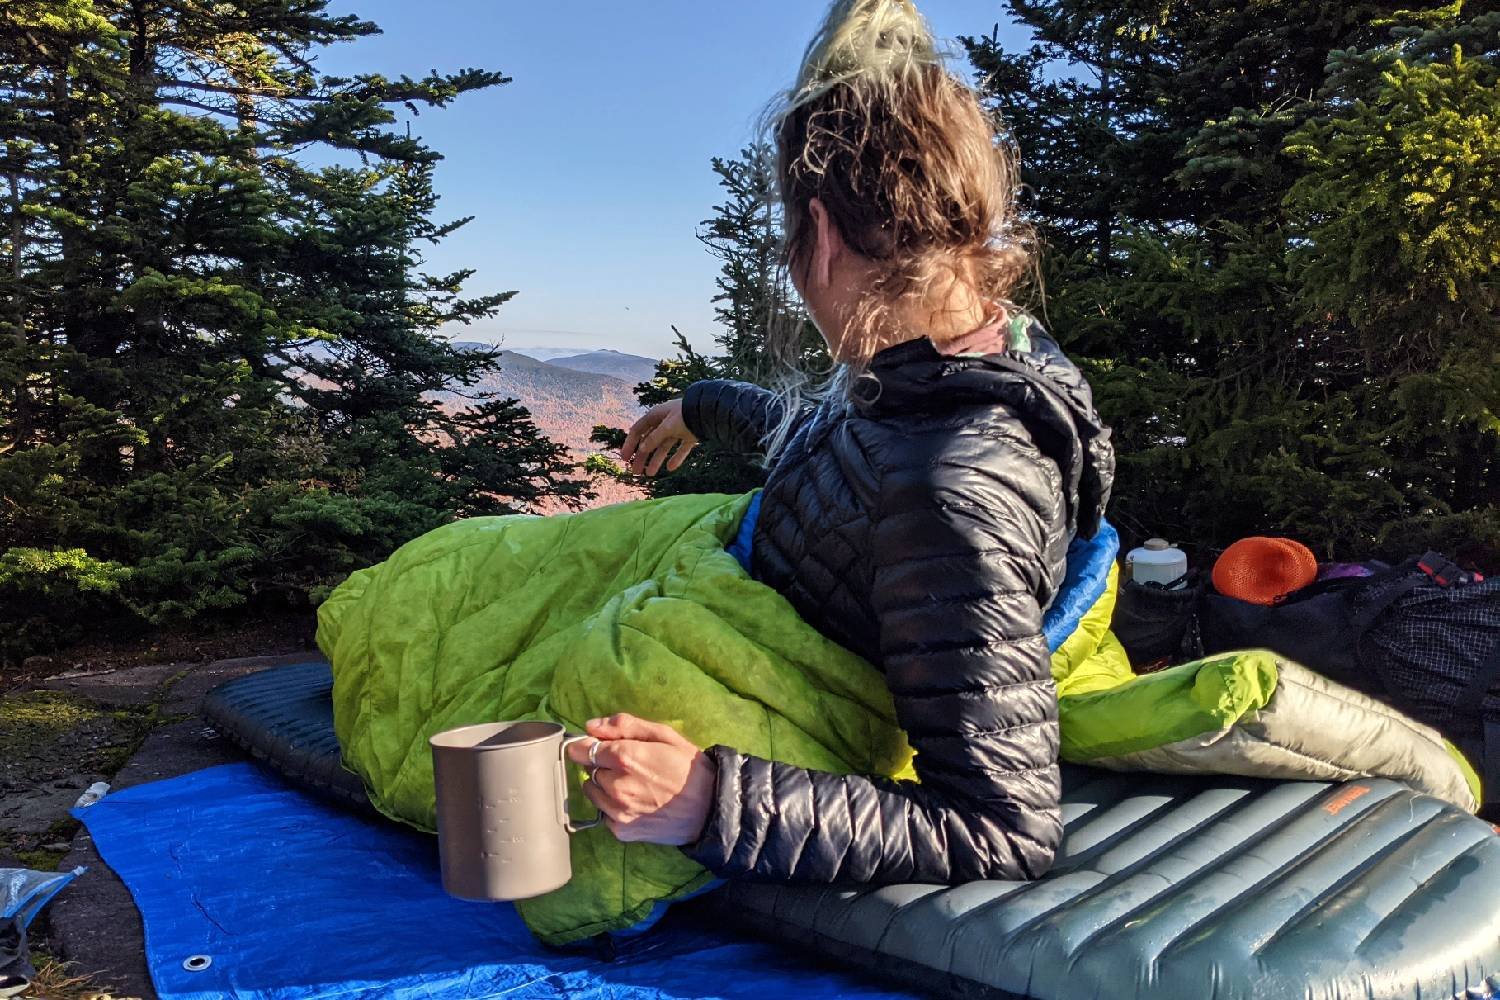 A hiker laying in the Loco Libre Ghost Pepper quilt looking at a mountain view